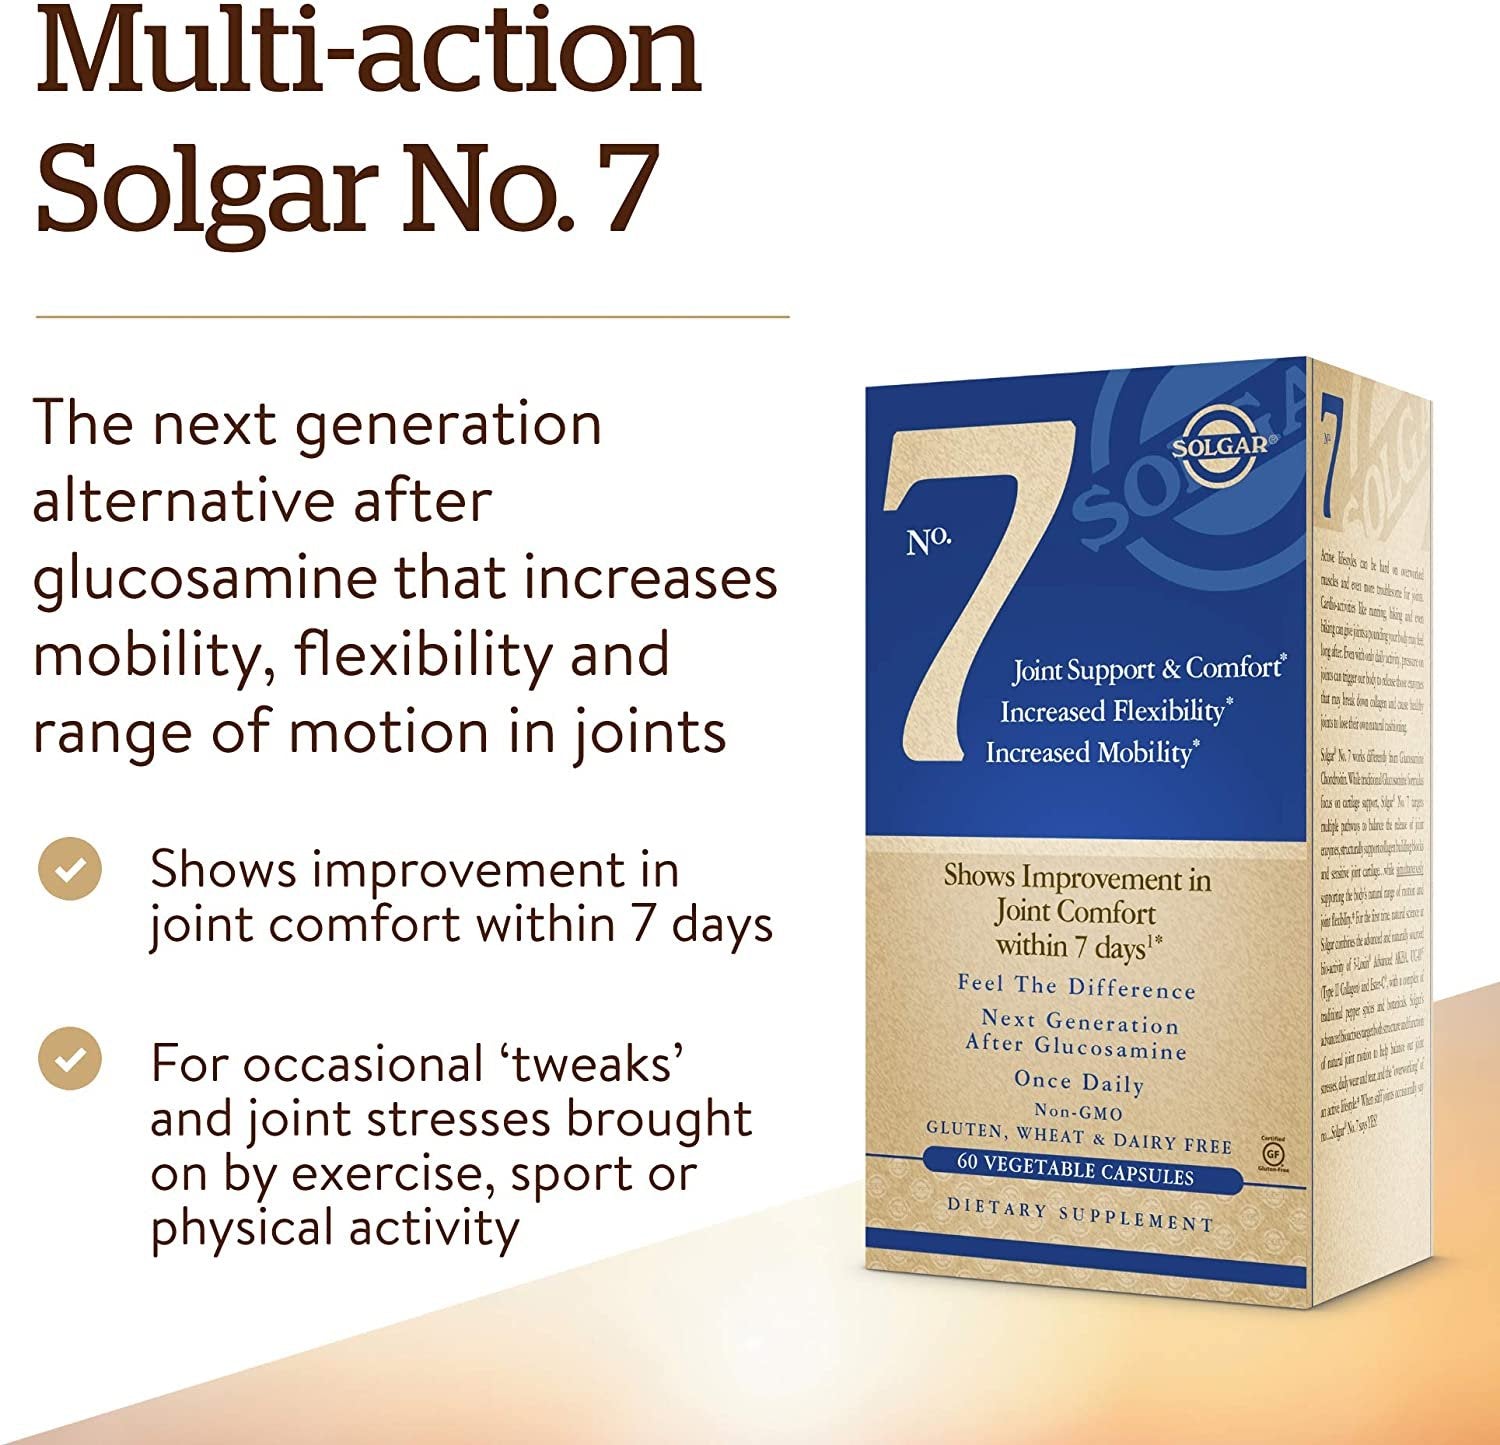 Solgar No. 7, 60 Vegetable Capsules - Joint Support & Comfort - Increased Mobility & Flexibility - Supplement for Men & Women - With Ester-C Vitamin C - Gluten Free, Non GMO, Dairy Free - 60 Servings